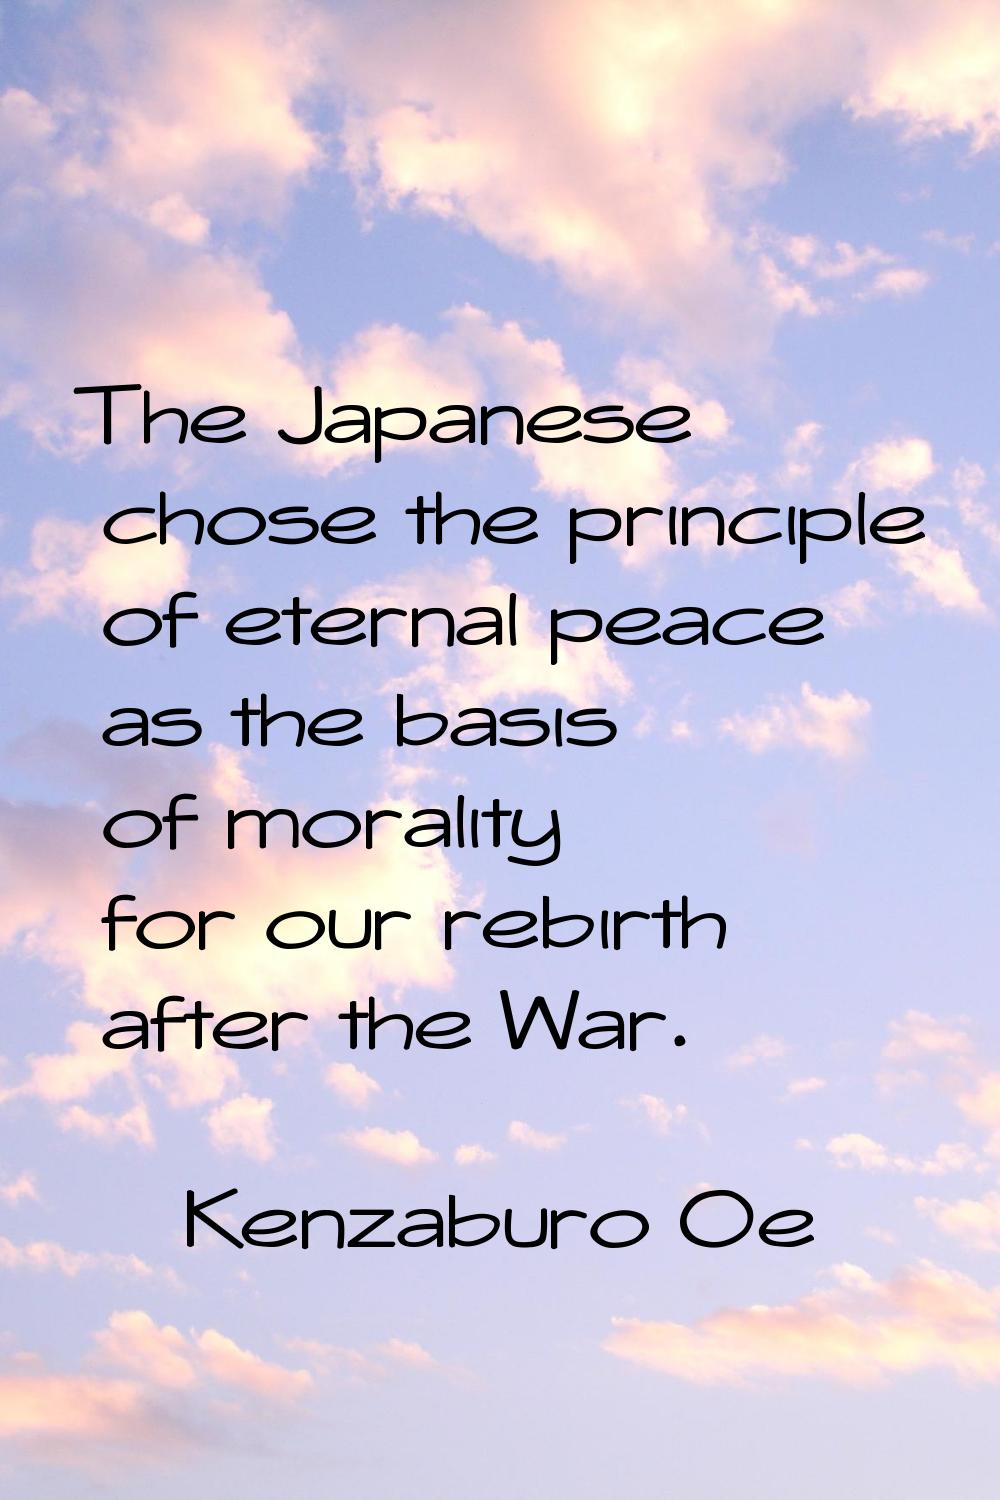 The Japanese chose the principle of eternal peace as the basis of morality for our rebirth after th